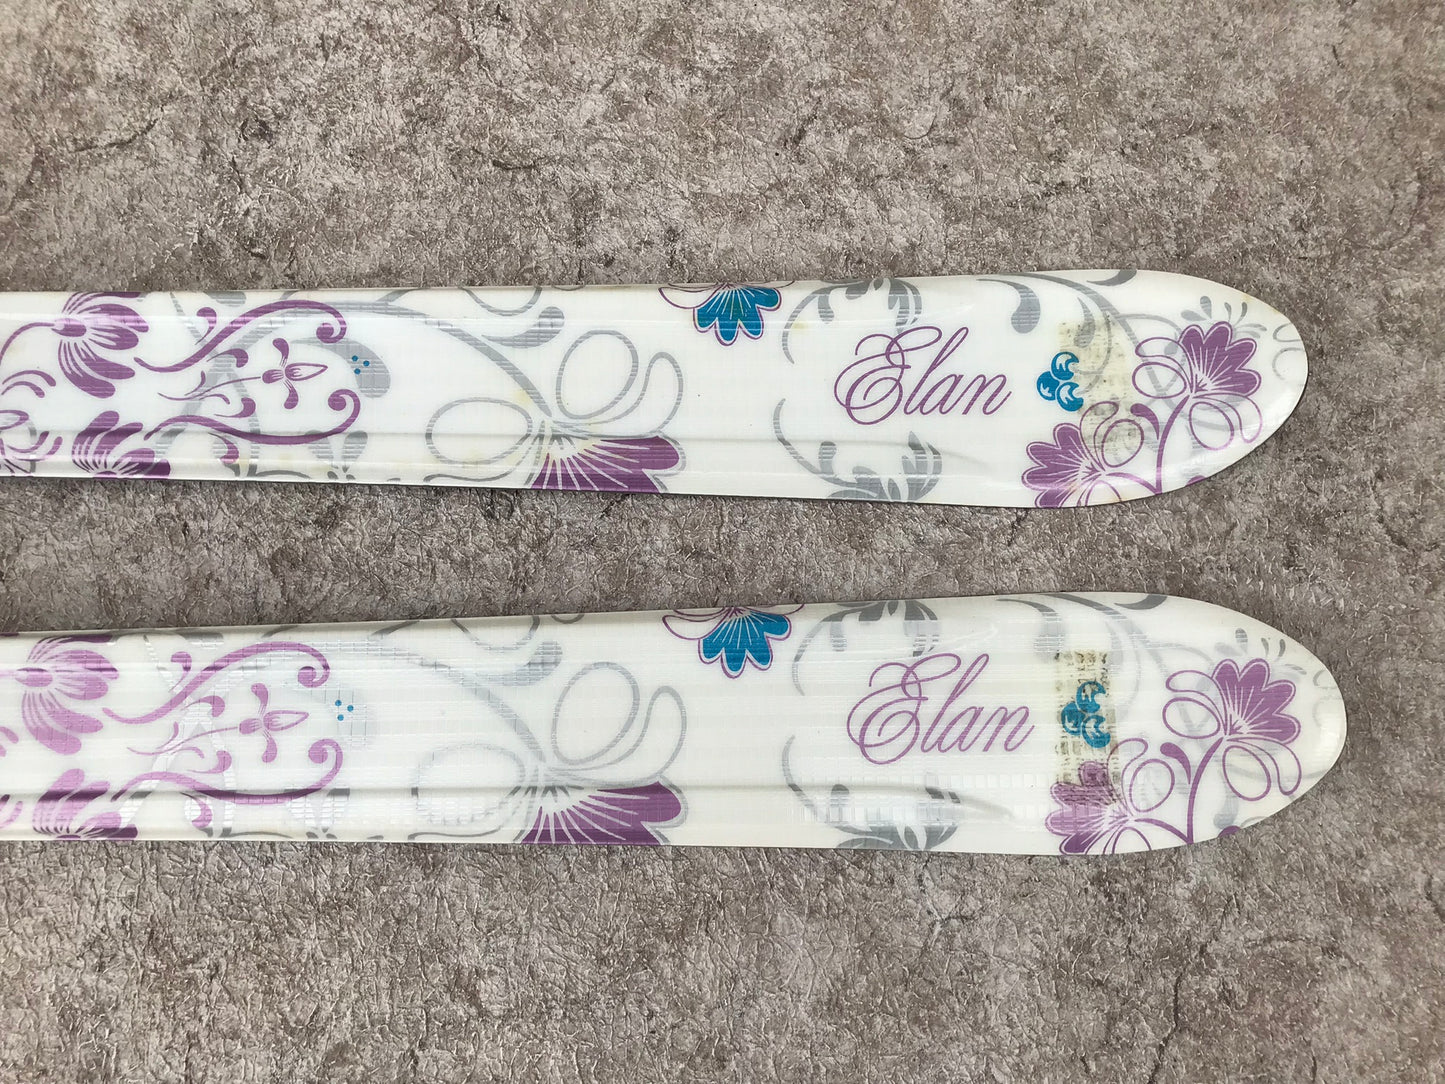 Ski 140 Elan Lil Spice Parabolic White Purple With Bindings Excellent